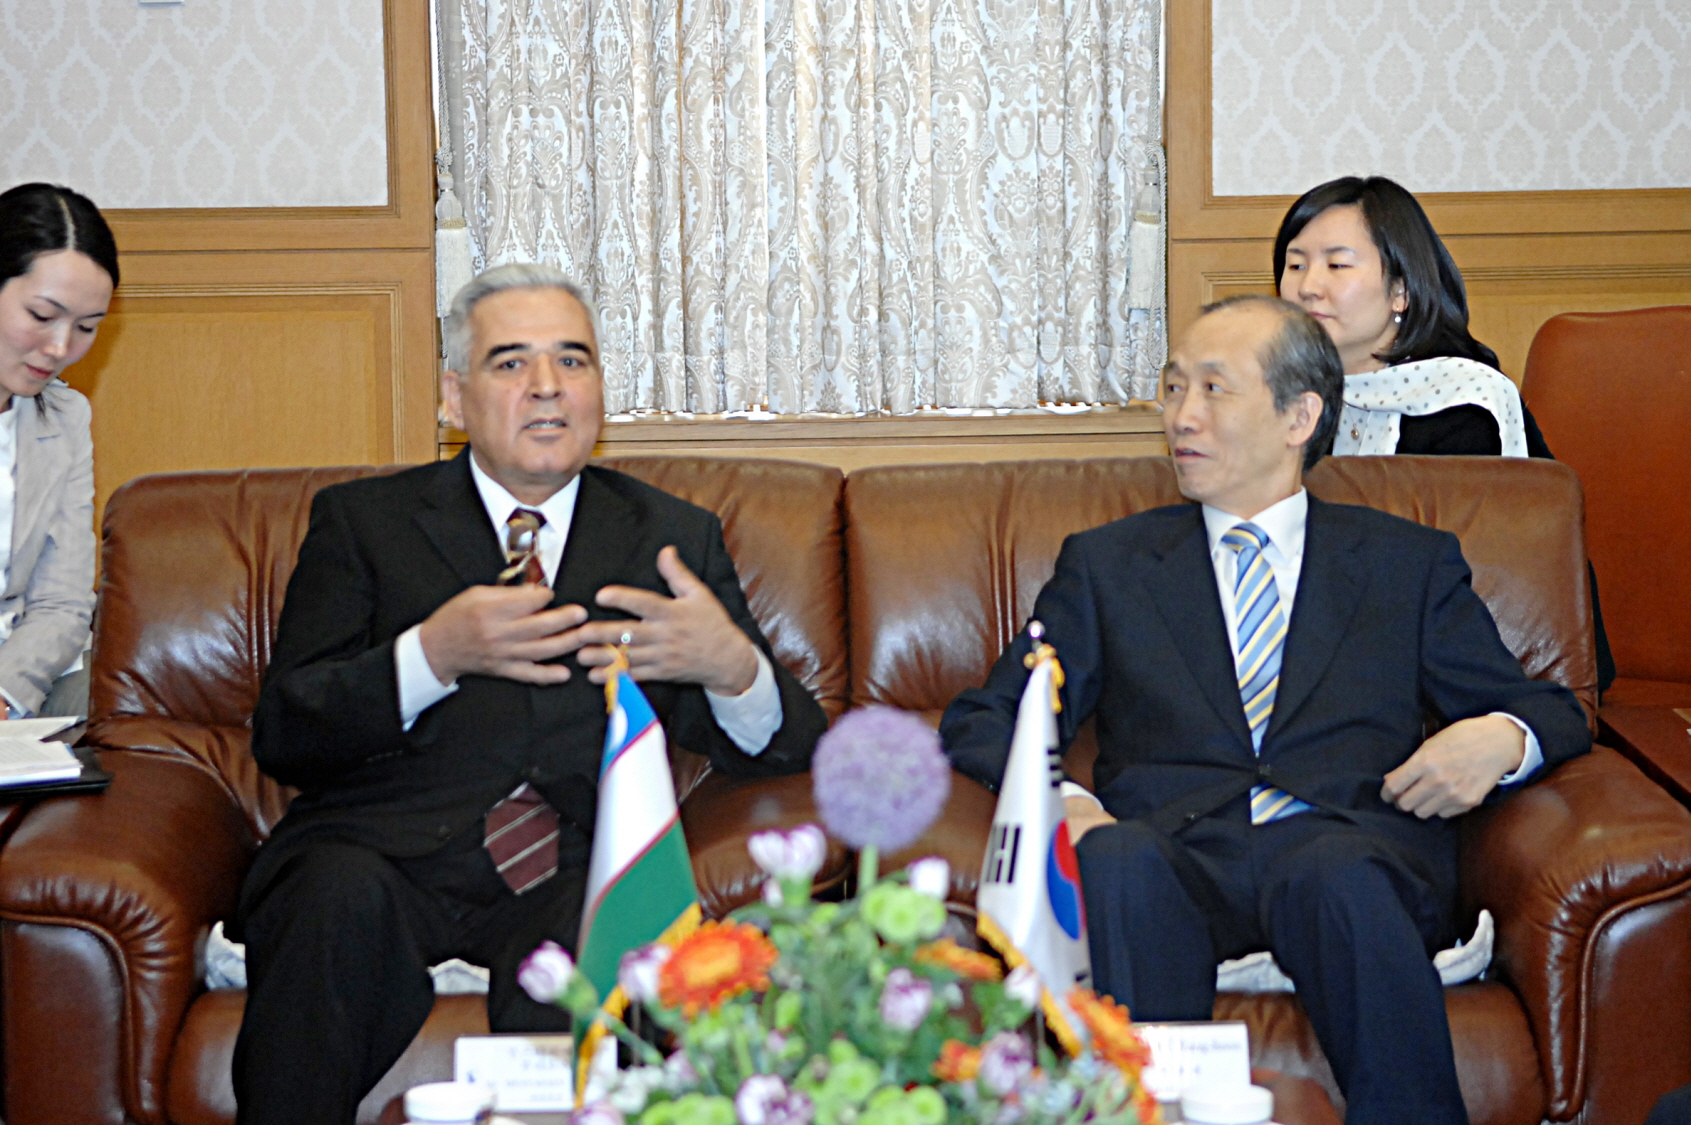 [04_21_09]Chief Justice of the Supreme Court of the Republic of Uzbekistan MUSTAFAEV Buritosh officially visits the Supreme Court of Korea